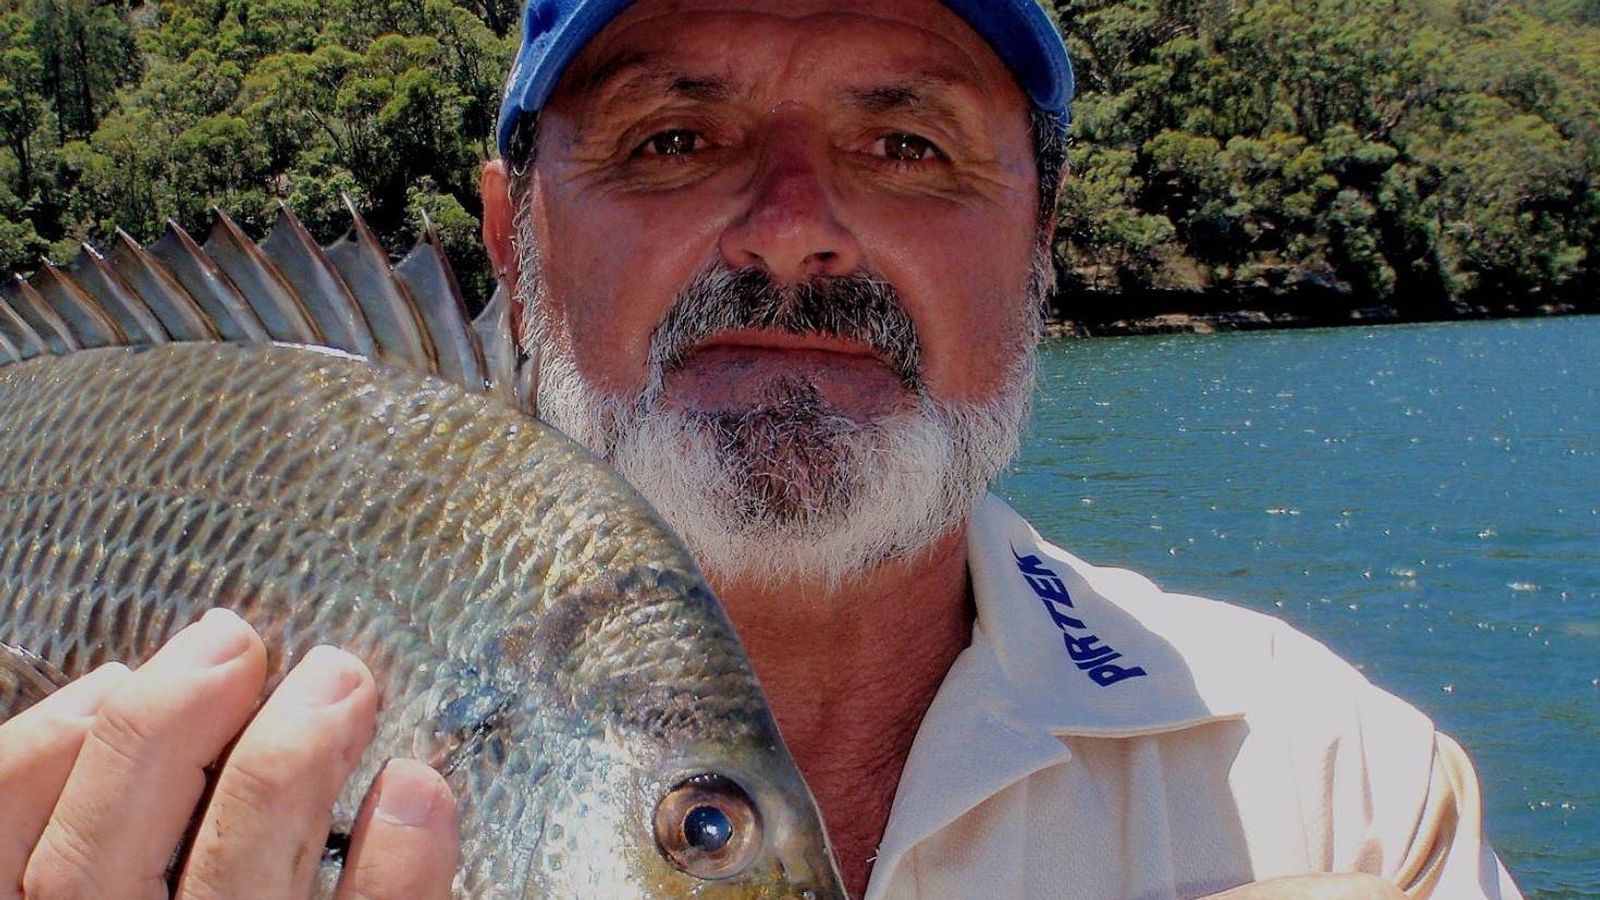 Sydney radio host Roman Butchaski vanishes during Queensland fishing trip in crocodile-infested waters